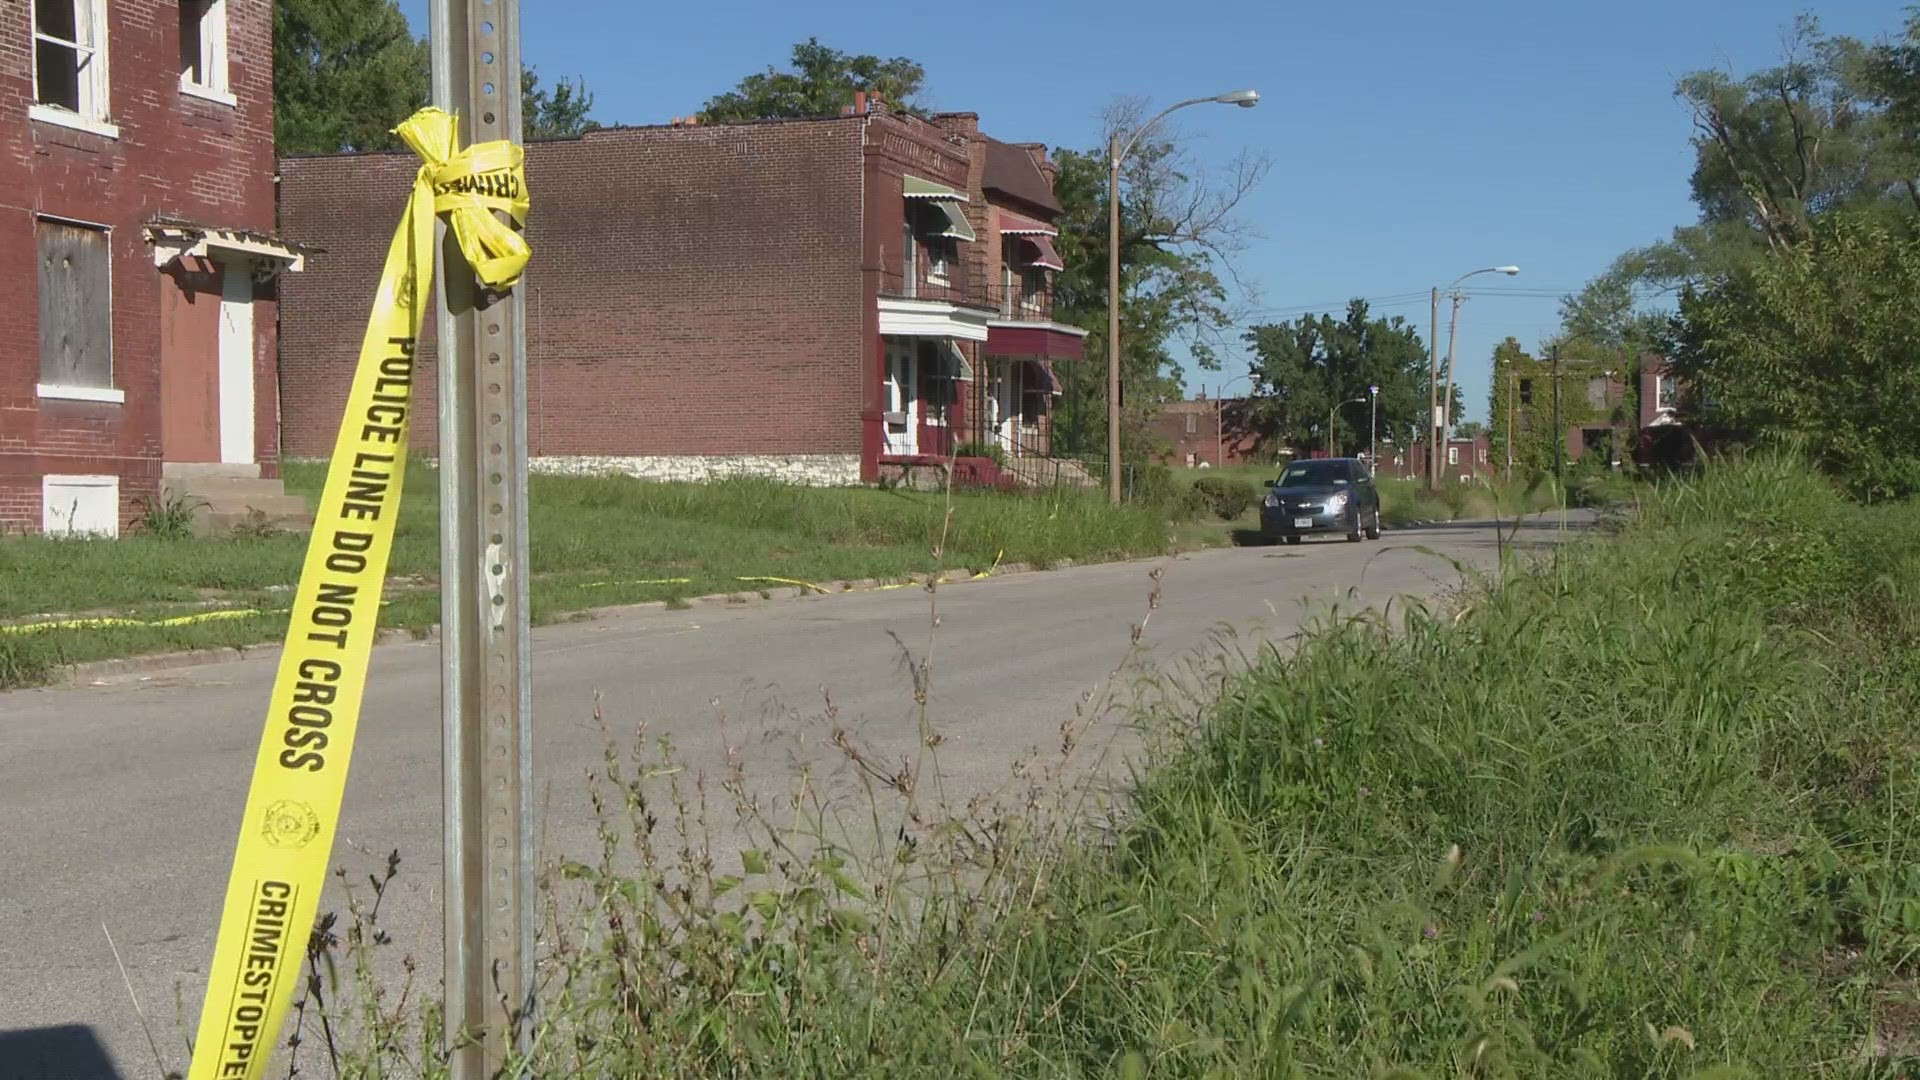 Residents of the Jeff-Vander-Lou neighborhood want to see changes after recent crime. A man was found dead in the streets of the neighborhood Friday morning.